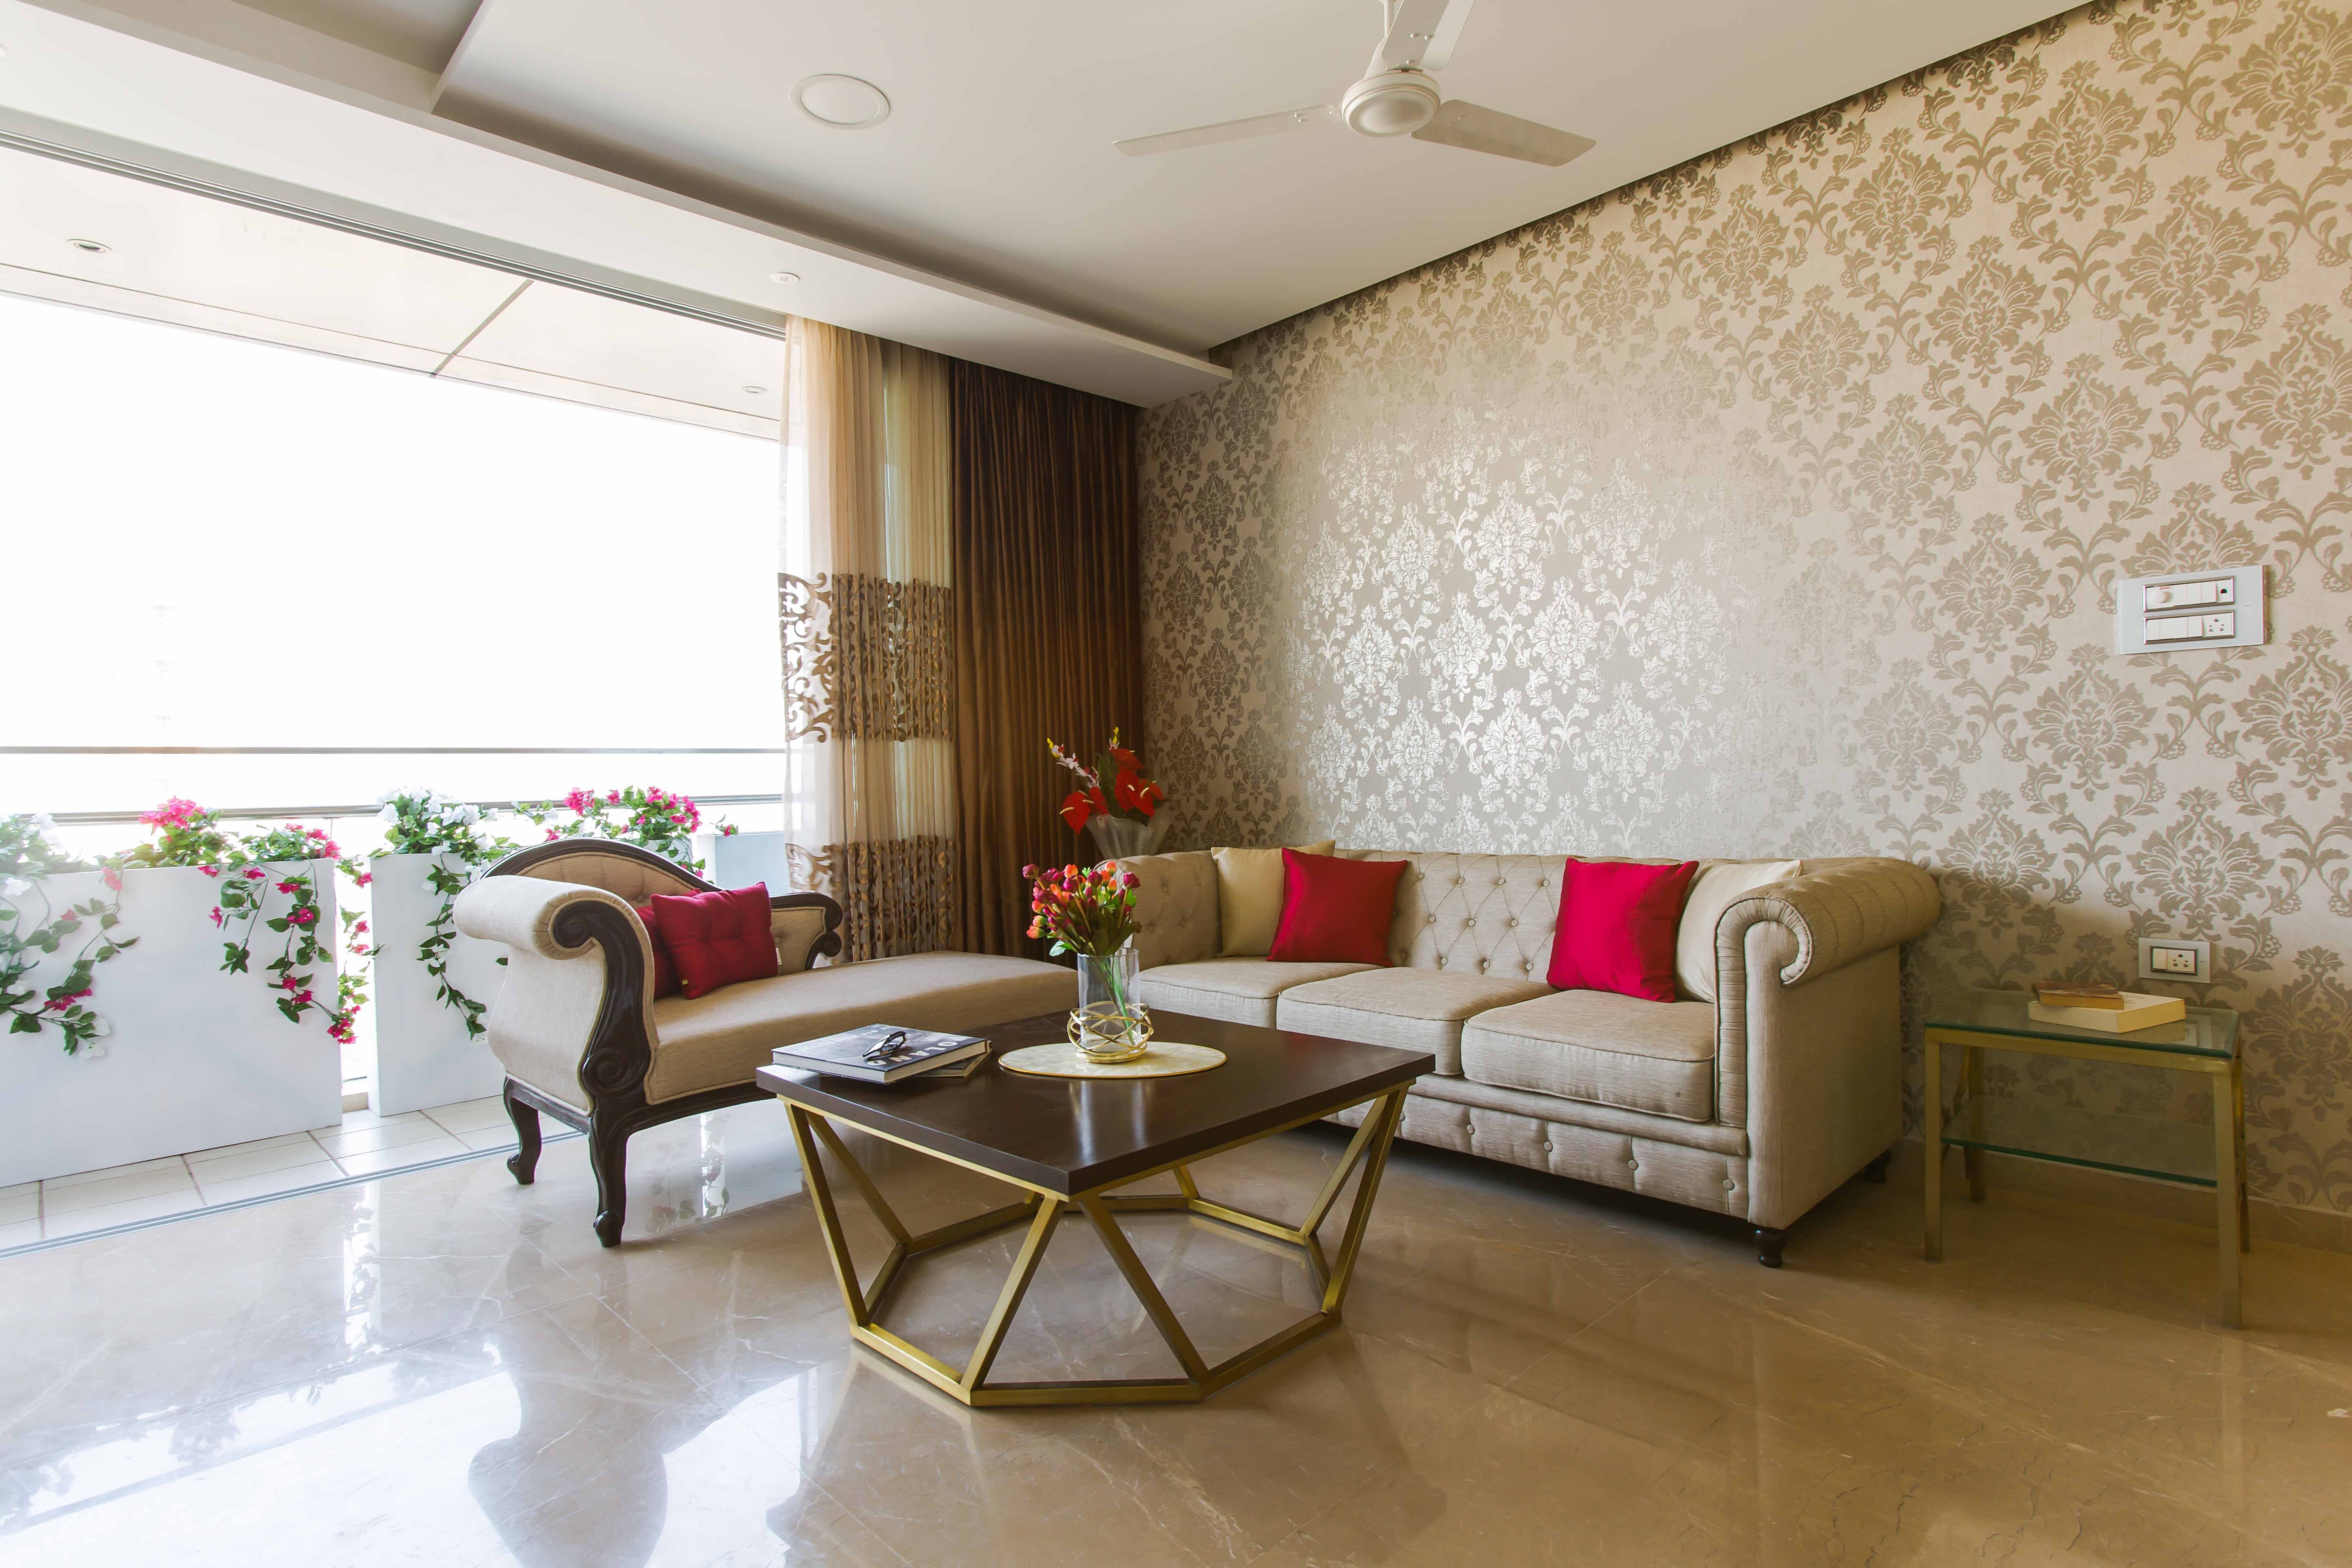 Classic 3-BHK Interior Design In Mumbai With Spacious Beige Living Room And Damask Wallpaper